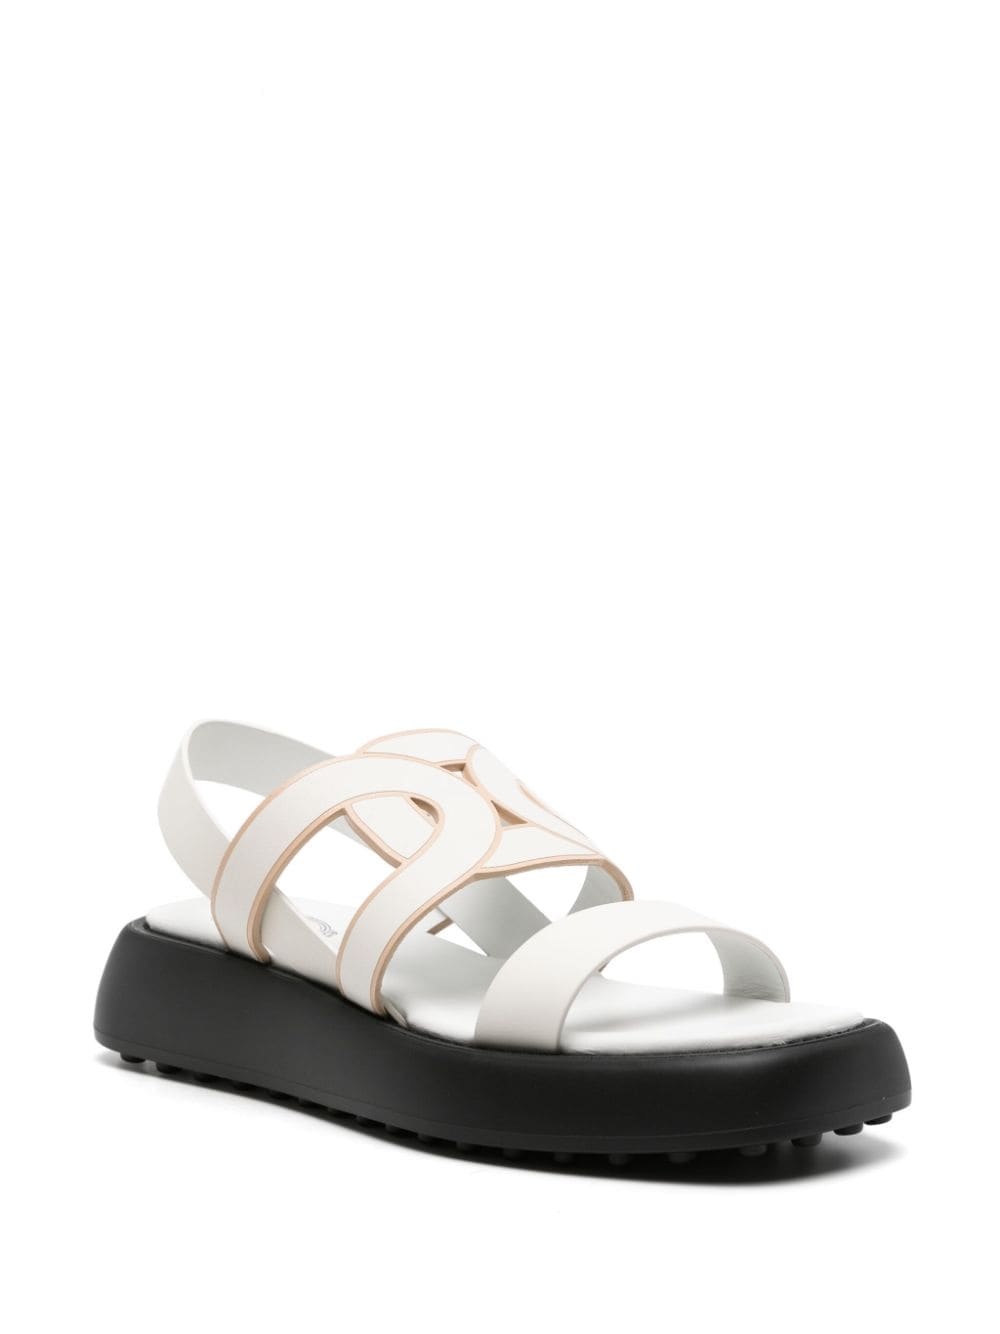 cut-out leather sandals - 2